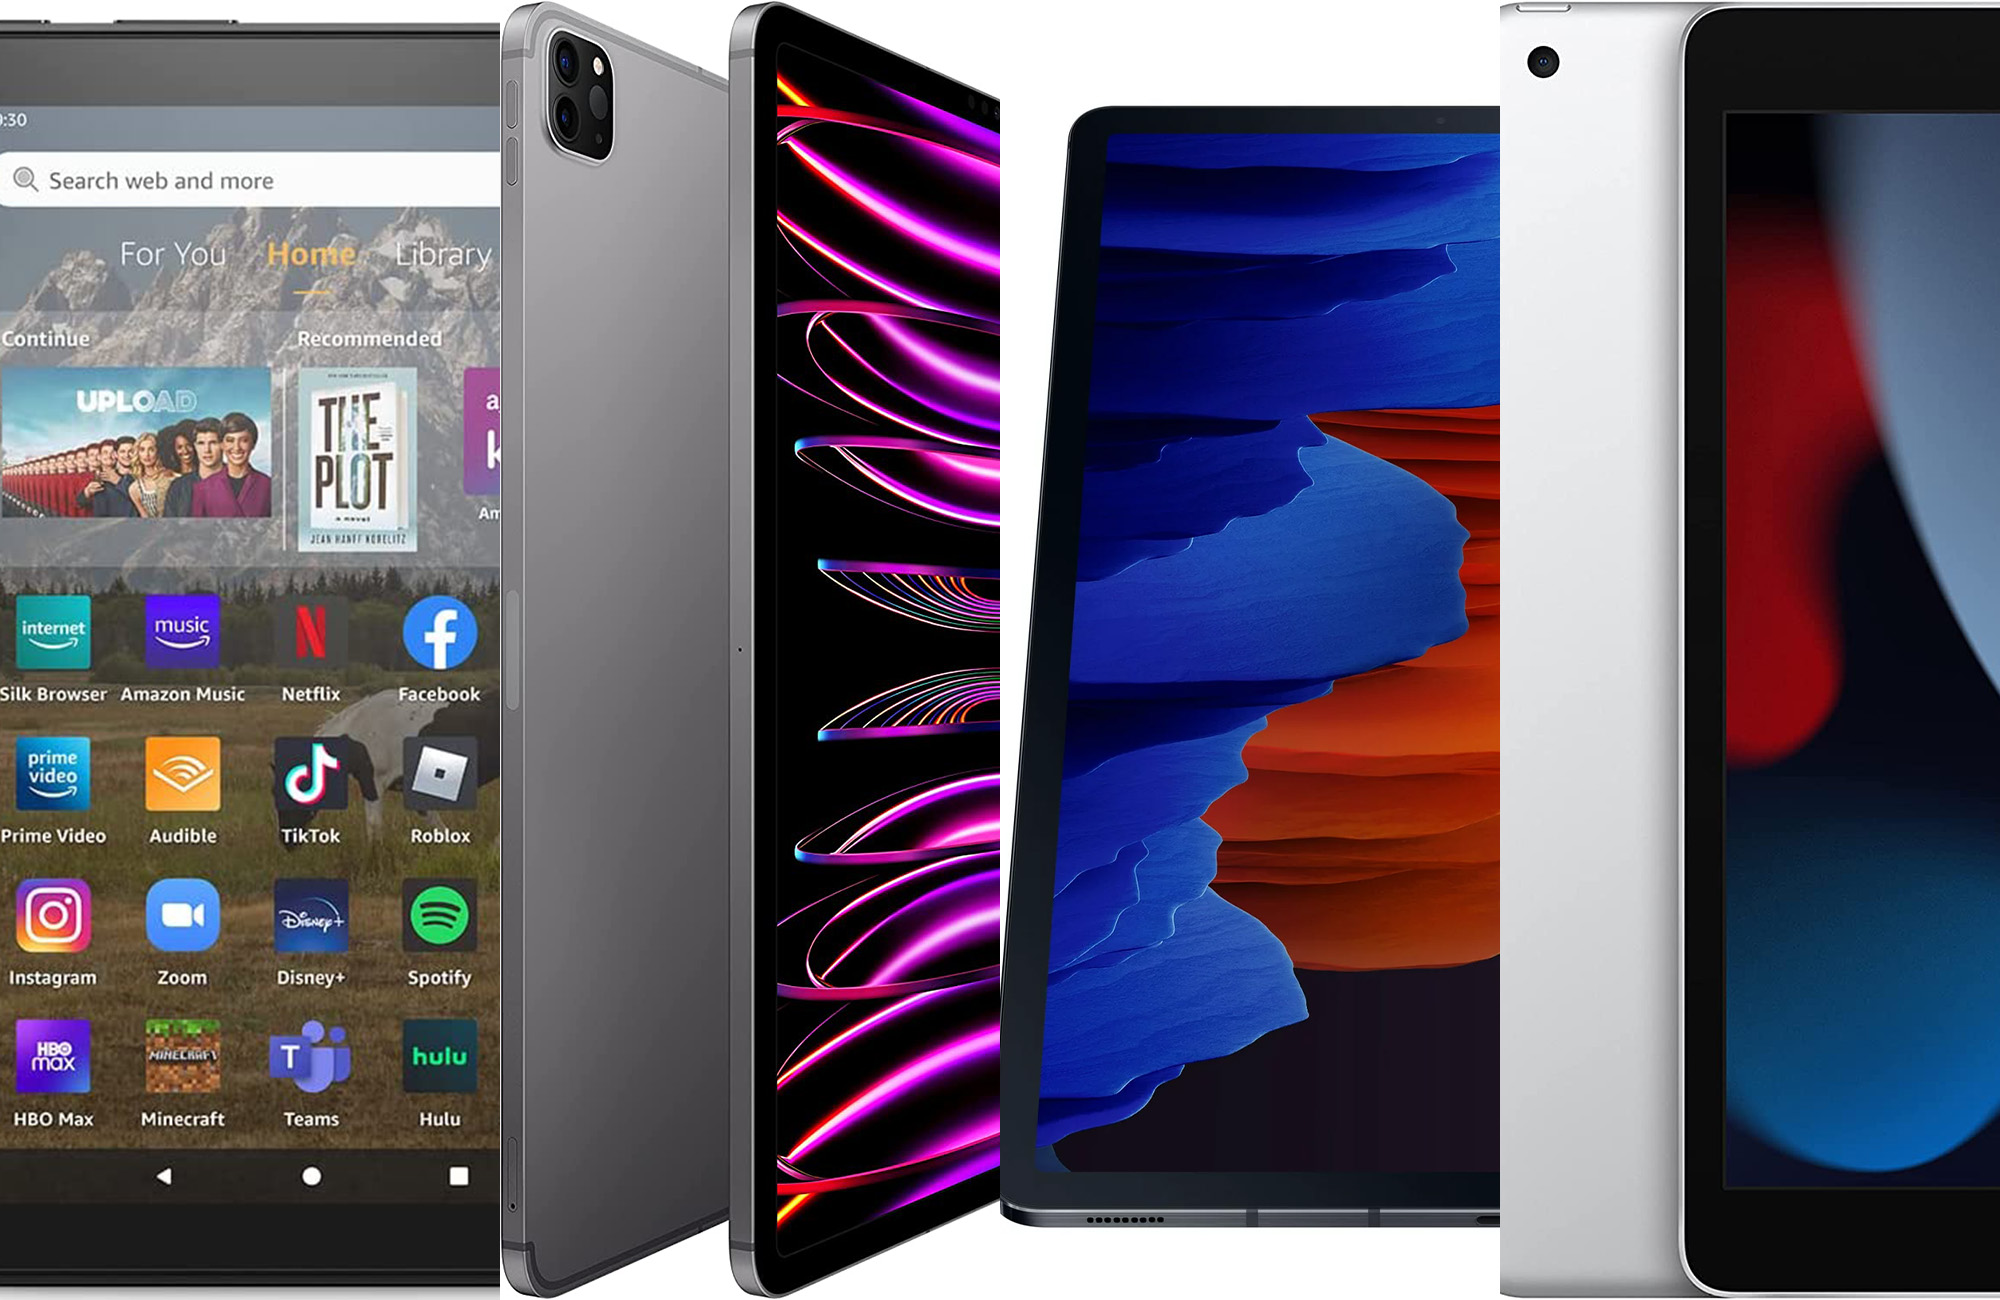 Cyber Monday tablet deals: iPads, Kindles, and more